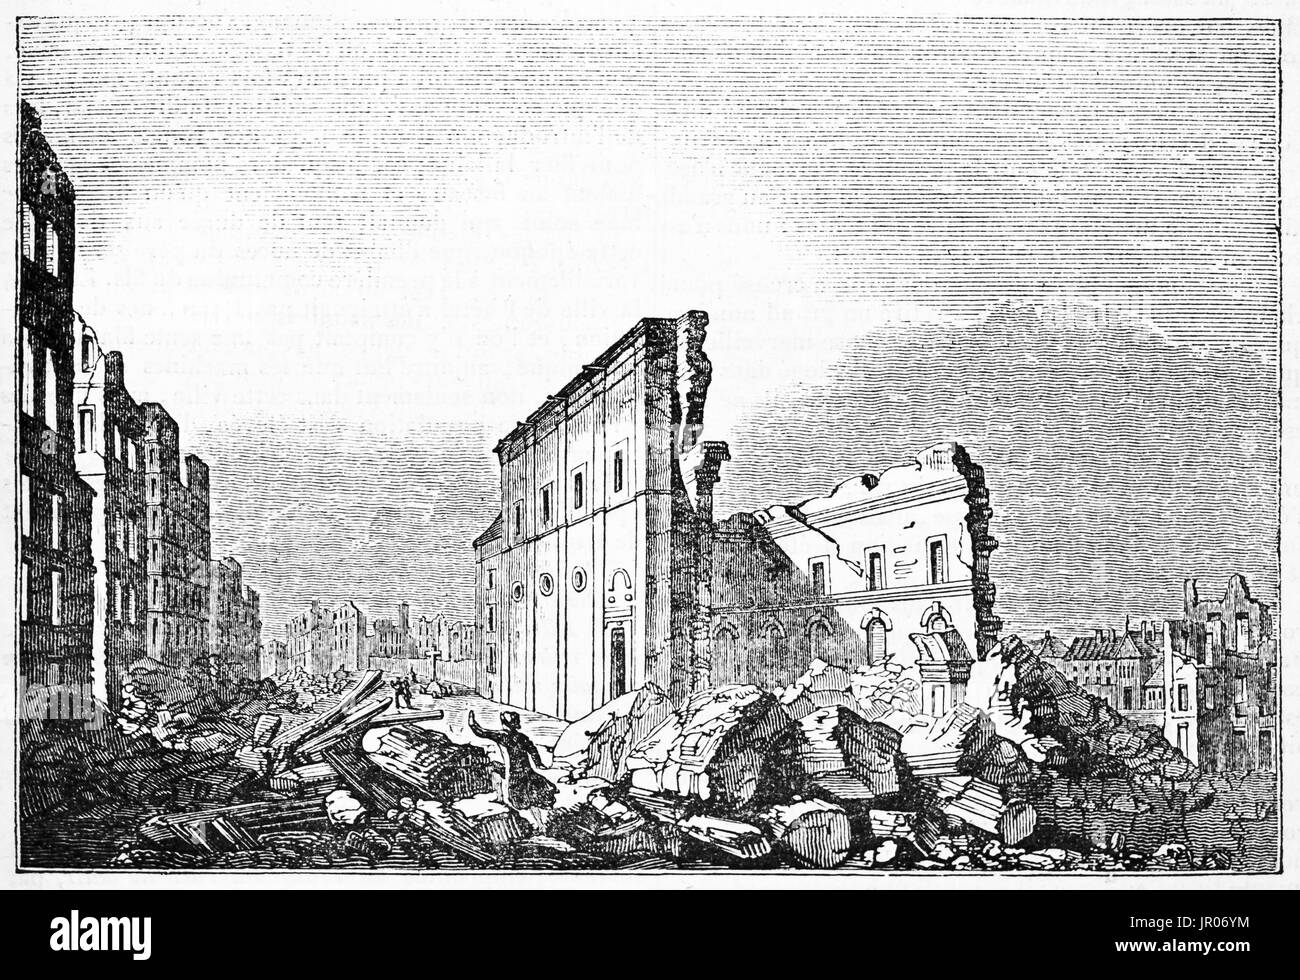 Old reproduction of 1757 picture depicting Saint-Paul ruins after 1755 Lisbon Earthquake. After painture of Le Bas, published on Magasin Pittoresque,  Stock Photo